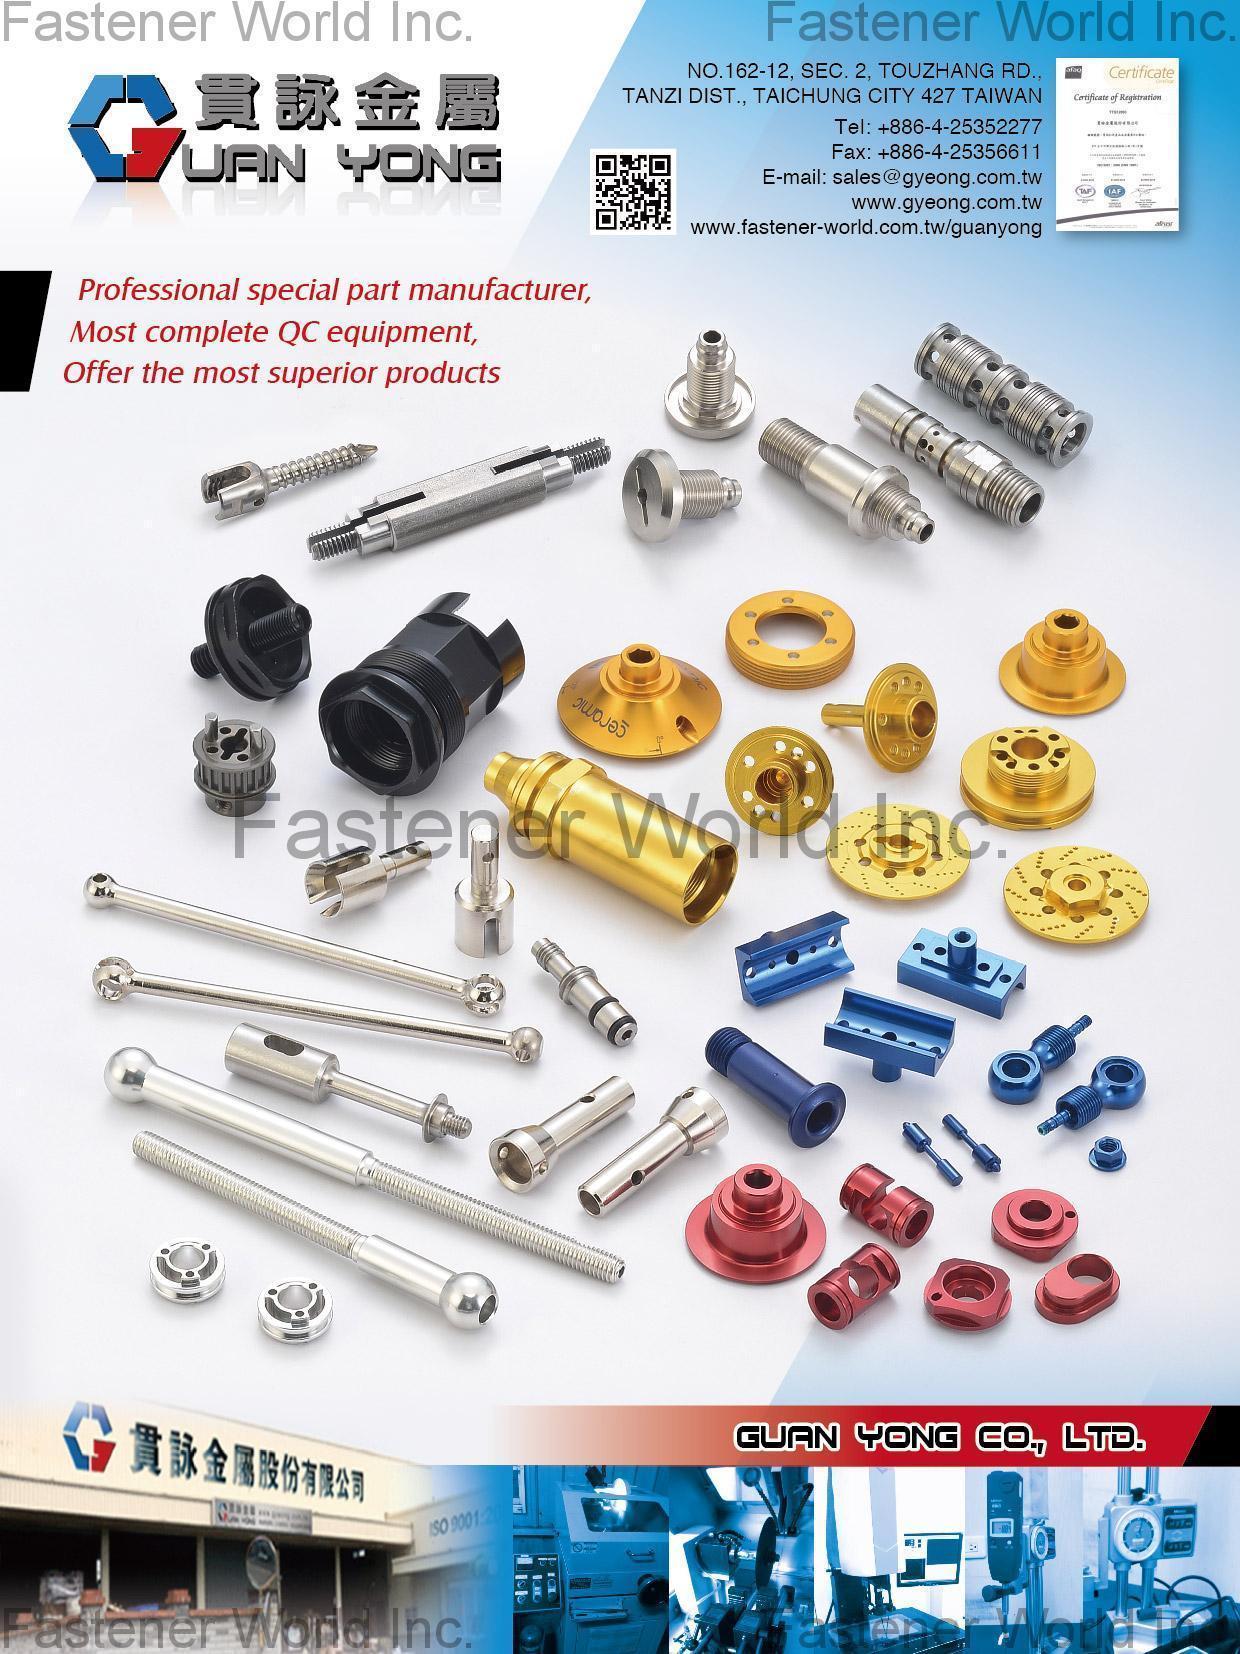 Guann Yeong Metal Co., Ltd. , CNC part / wrenchs / nut / beryunt / screw / washer , All Kinds of Screws